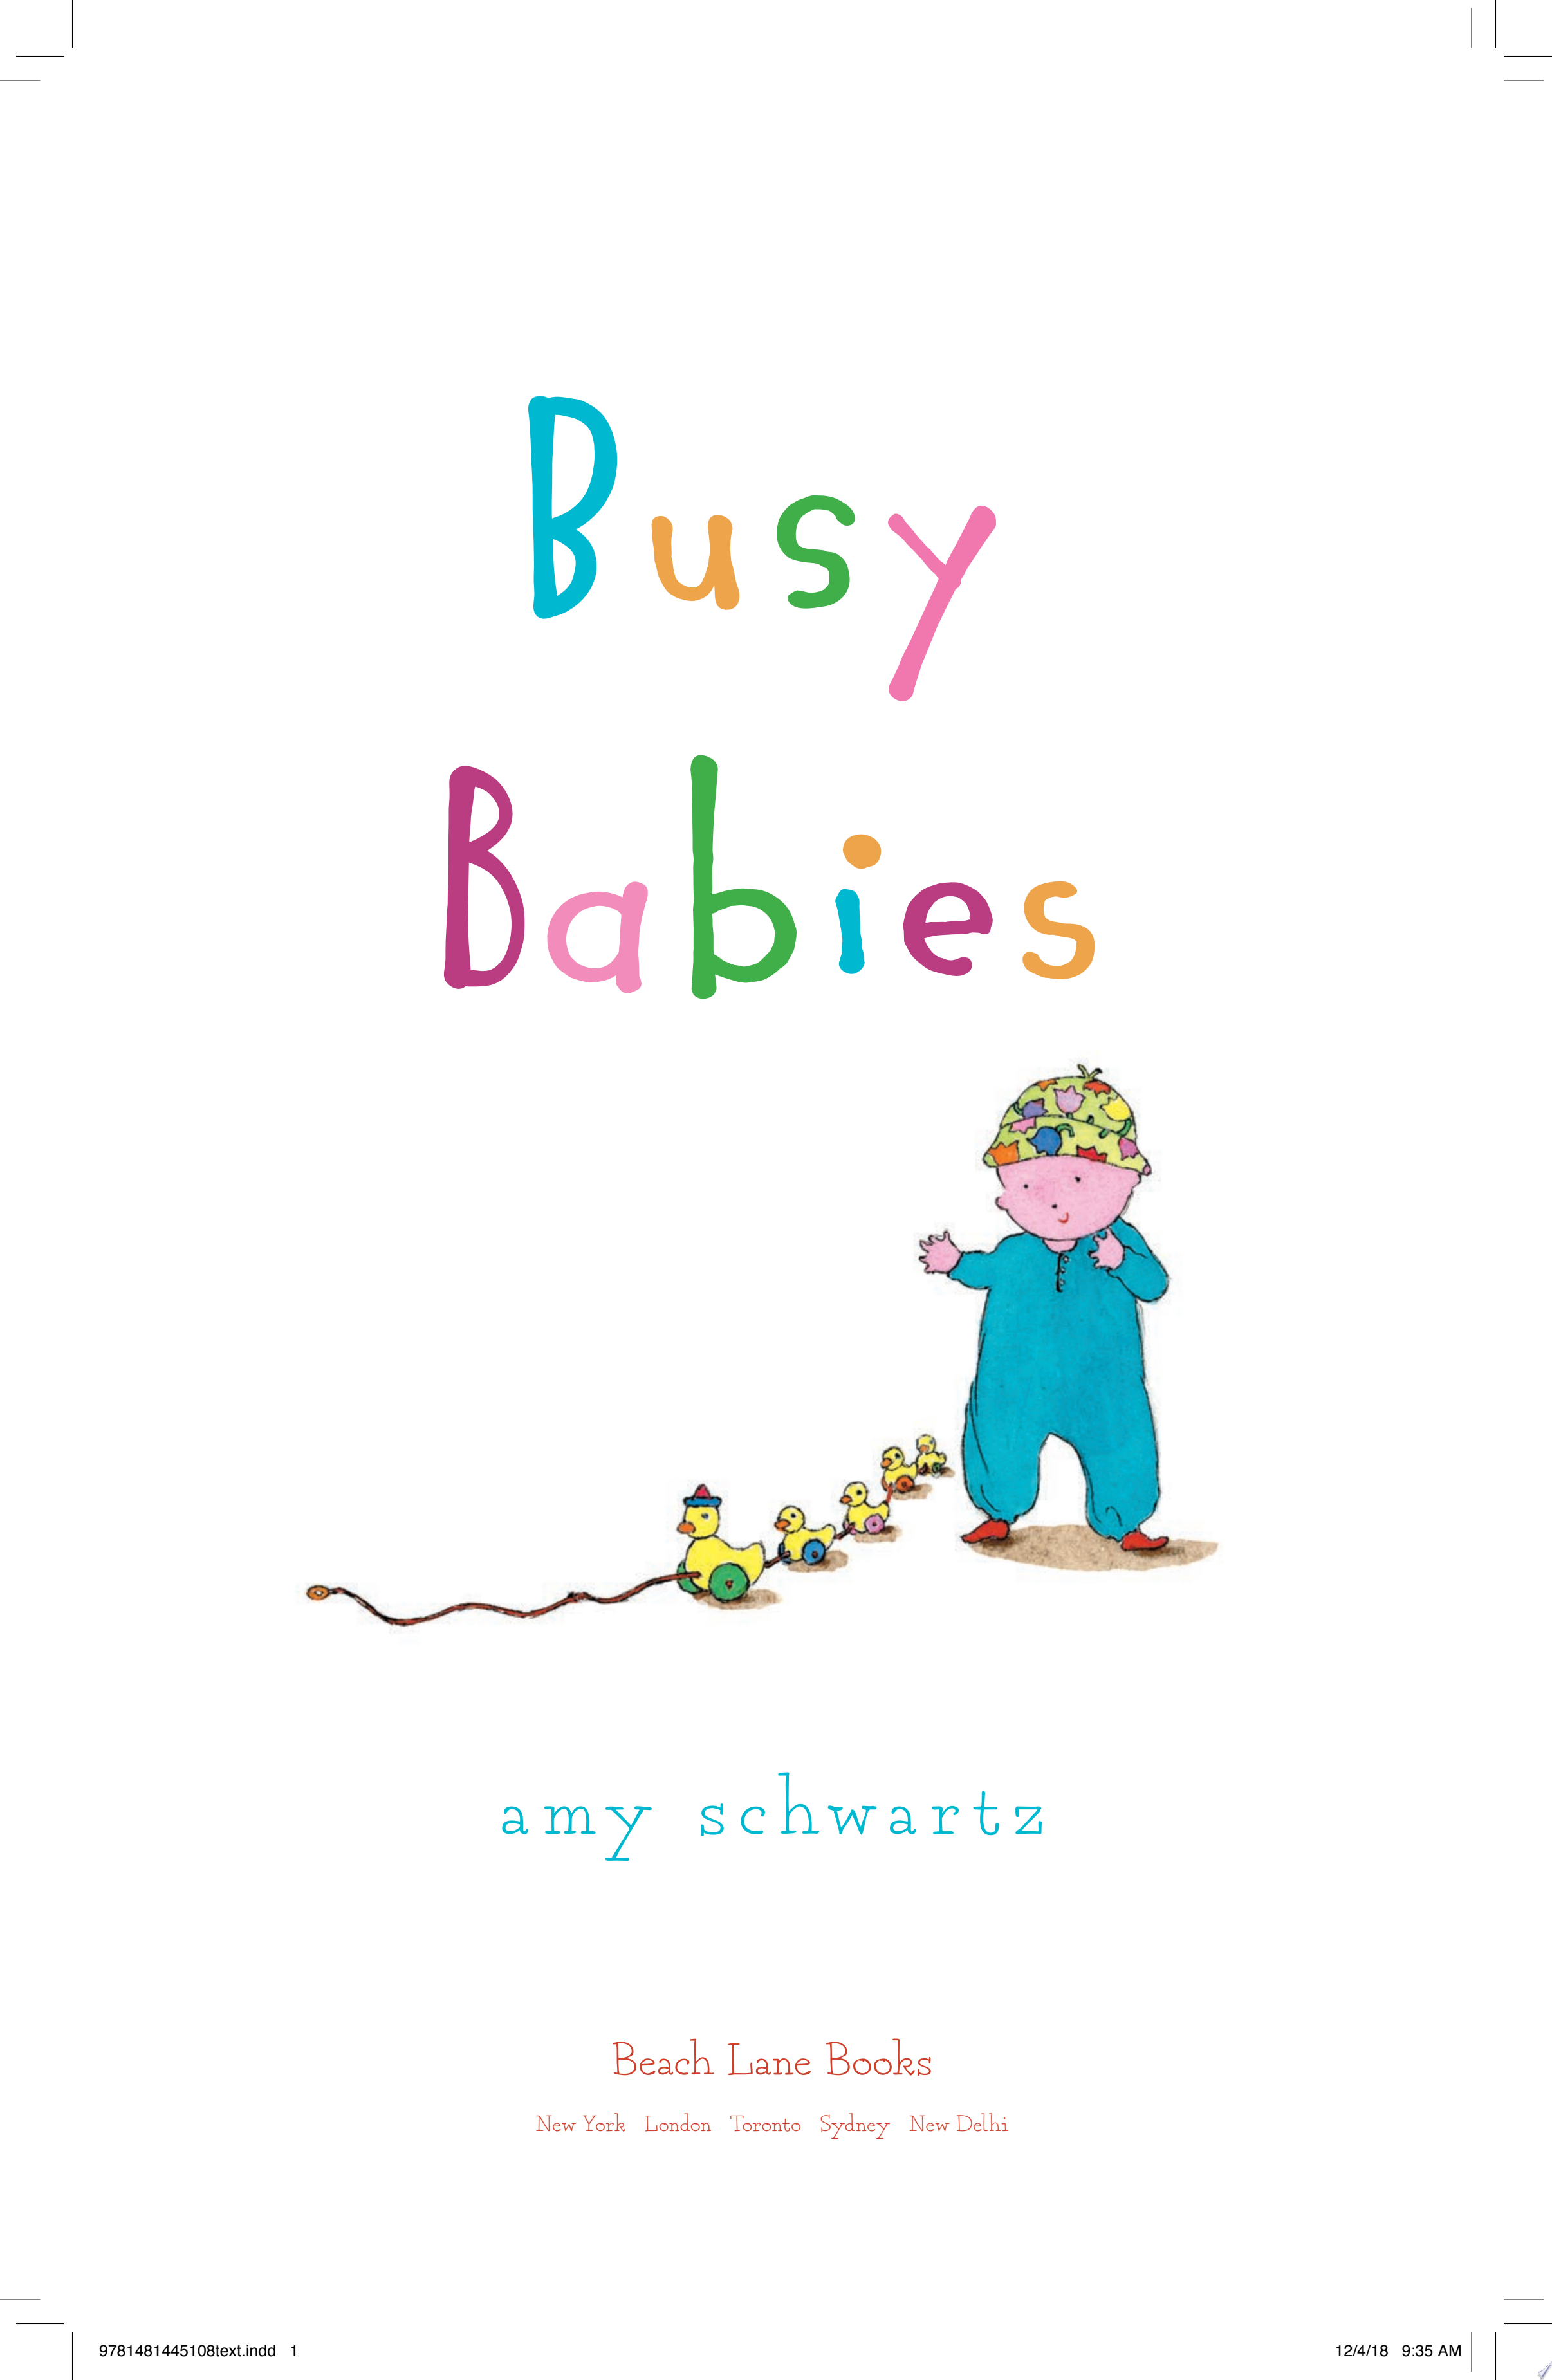 Image for "Busy Babies" - an illustration of a playing baby